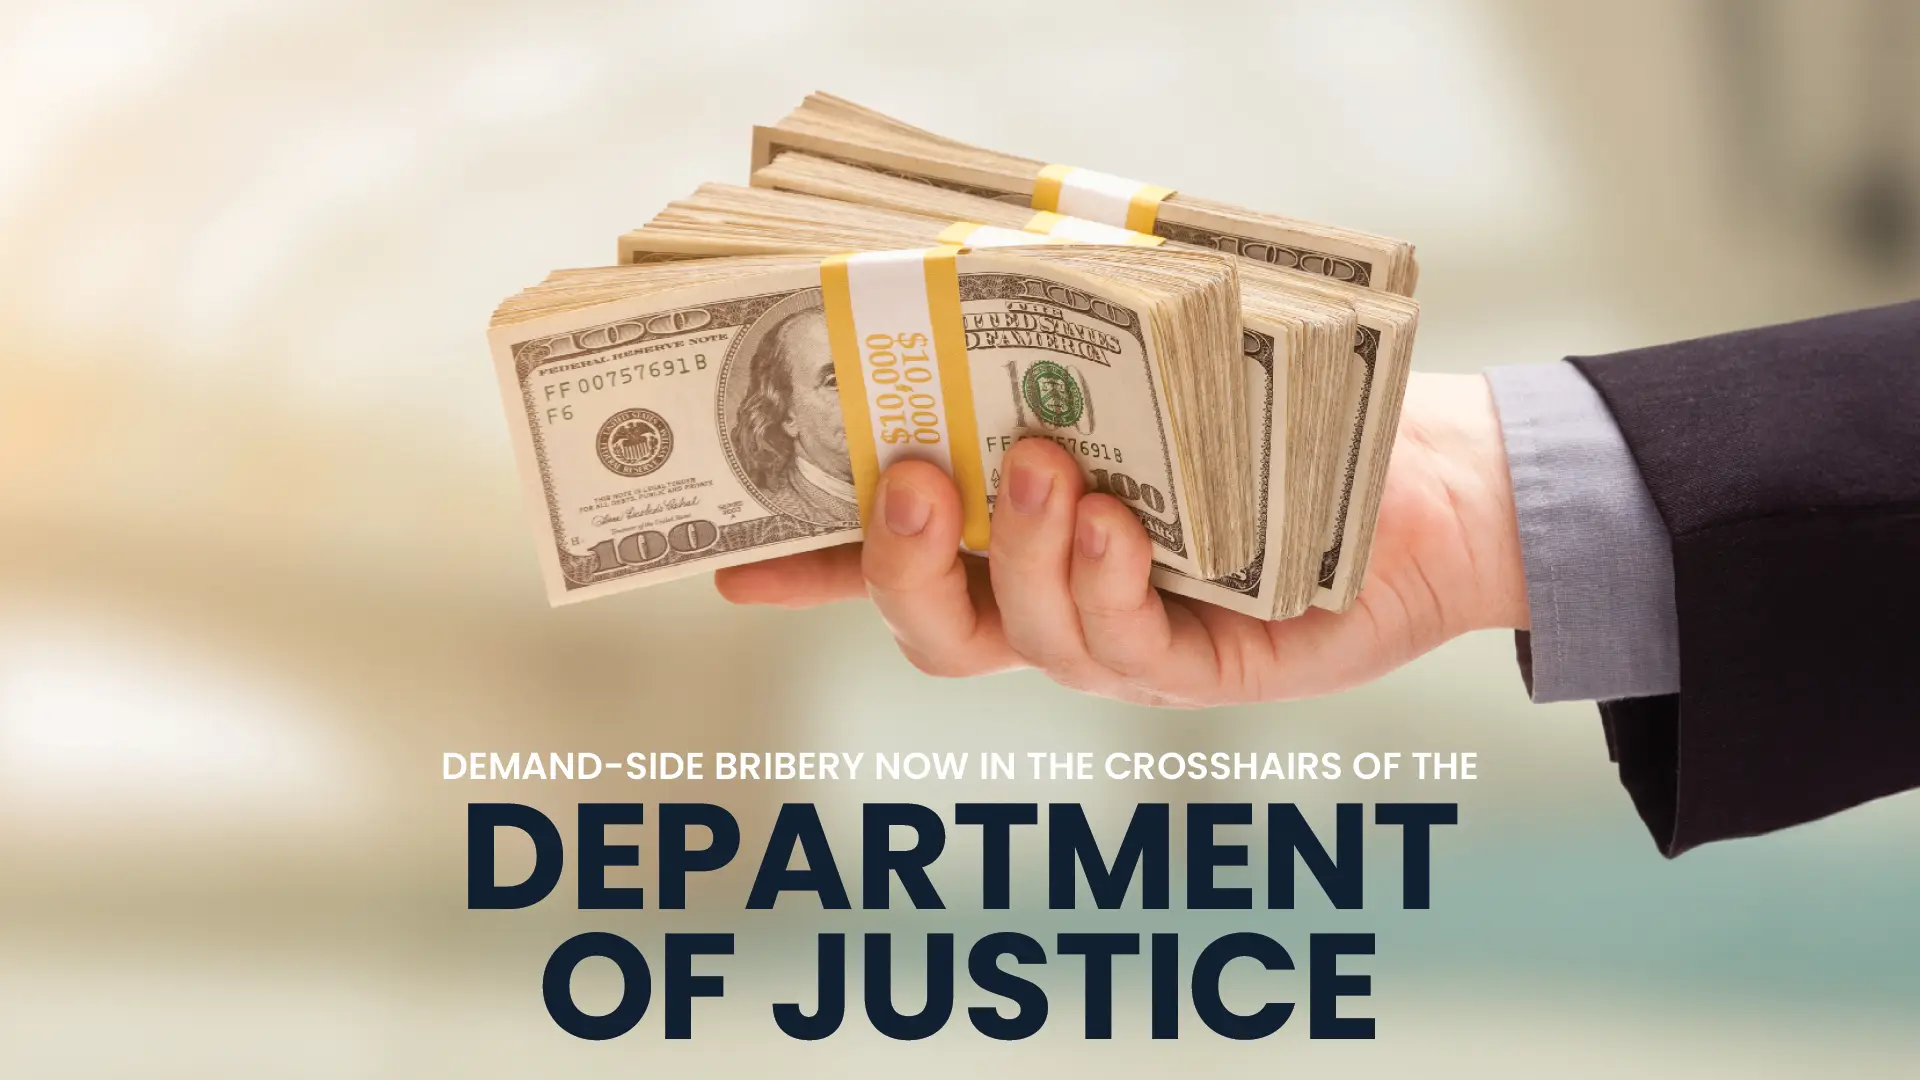 Demand-Side Bribery Now In The Crosshairs Of The Department of Justice